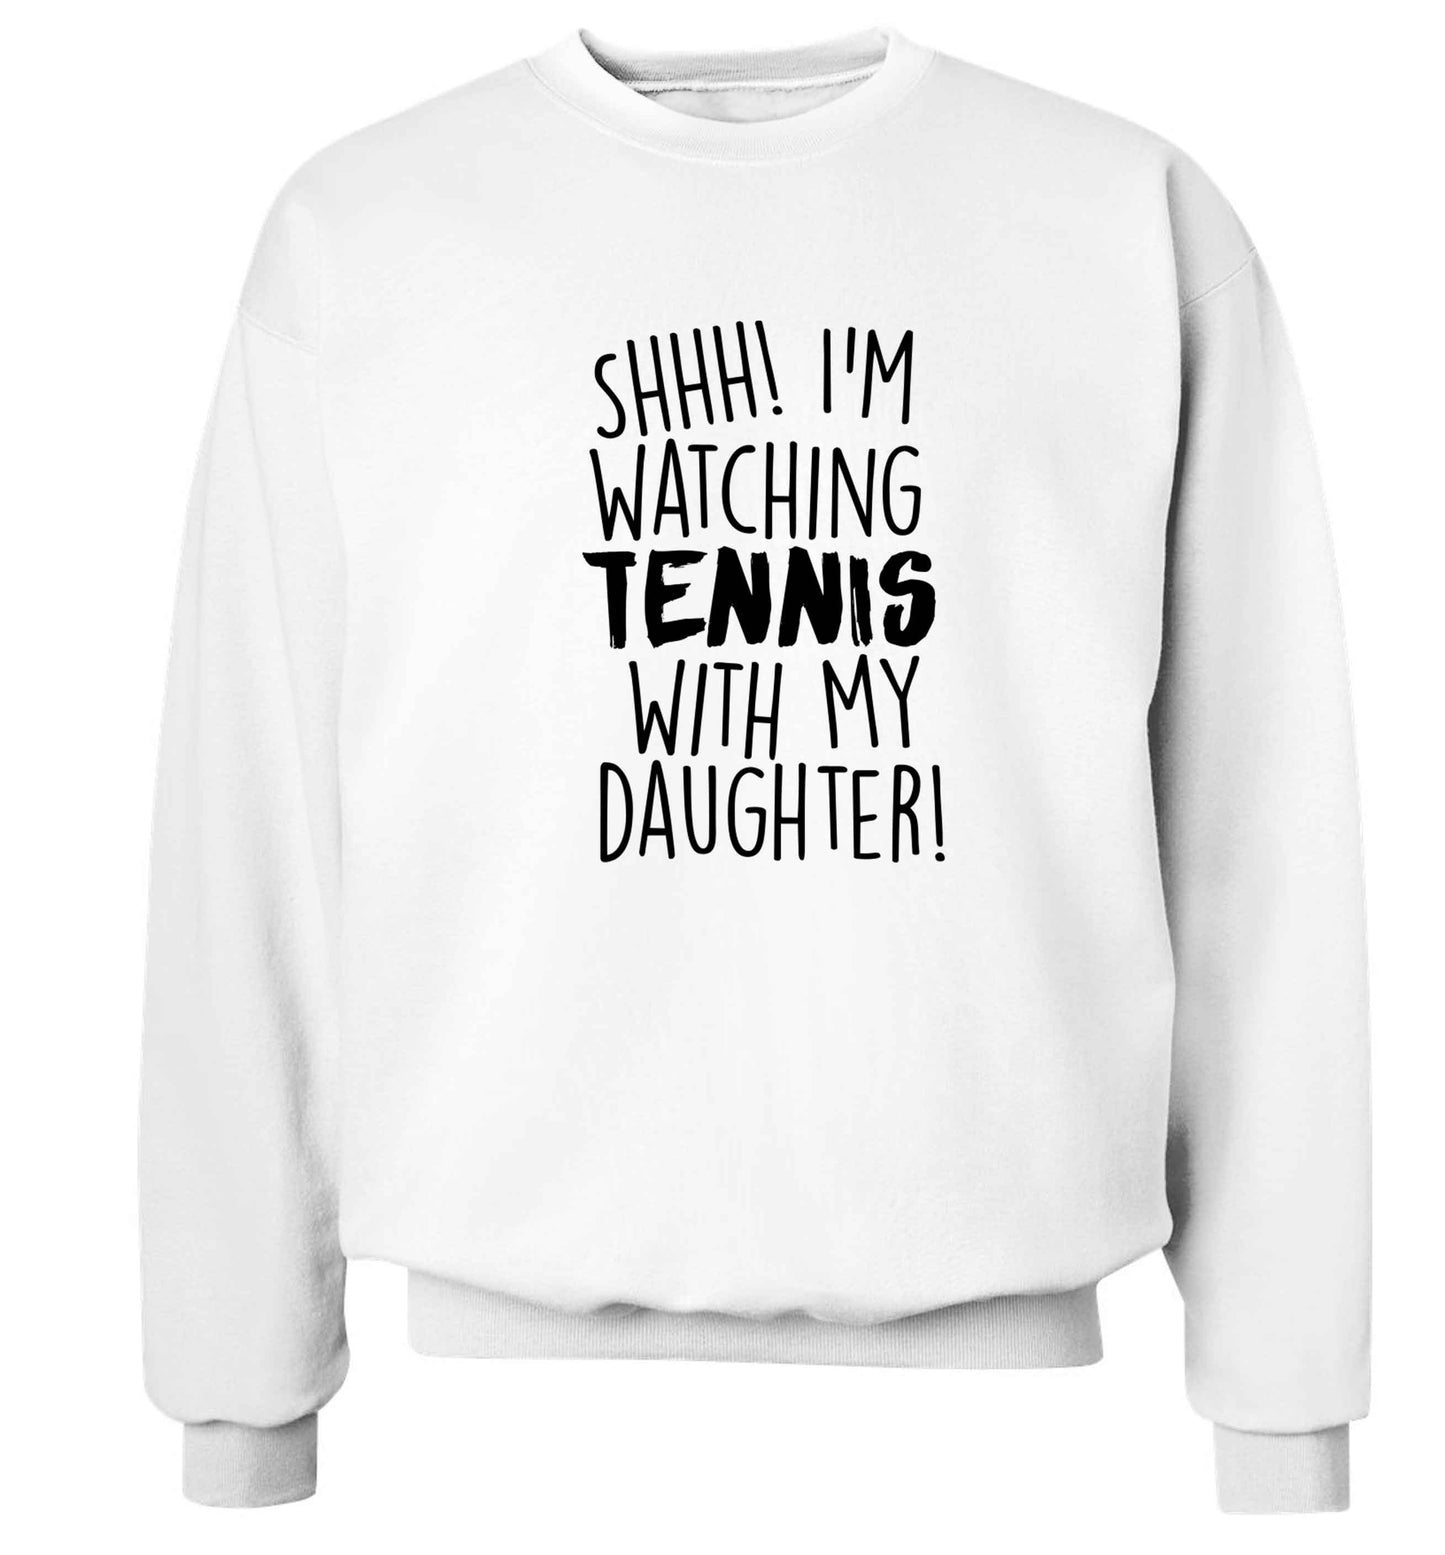 Shh! I'm watching tennis with my daughter! Adult's unisex white Sweater 2XL